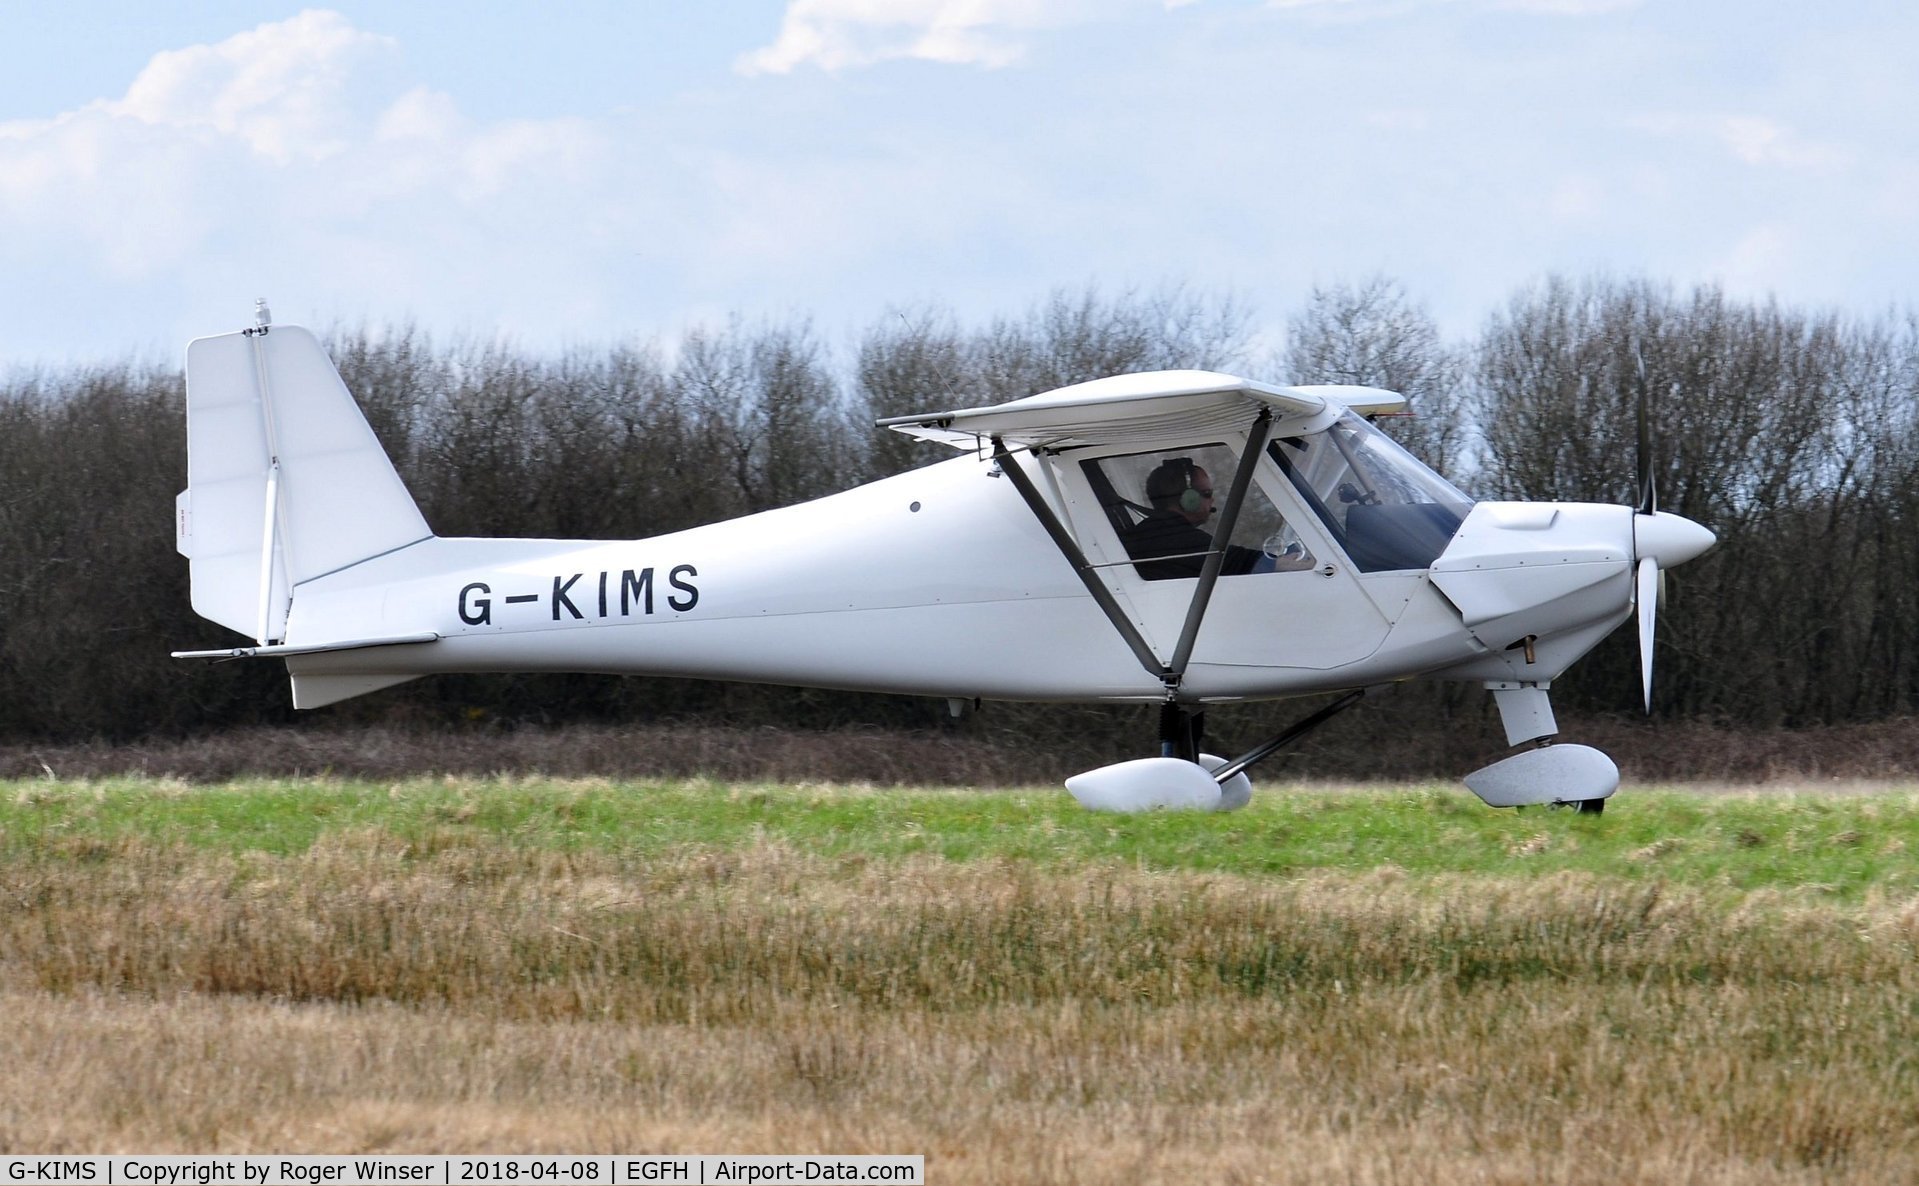 G-KIMS, 2017 Comco Ikarus C42 FB100 C/N 1704-7497, Resident Ikarus C.42 operated by Gower Flight Centre.